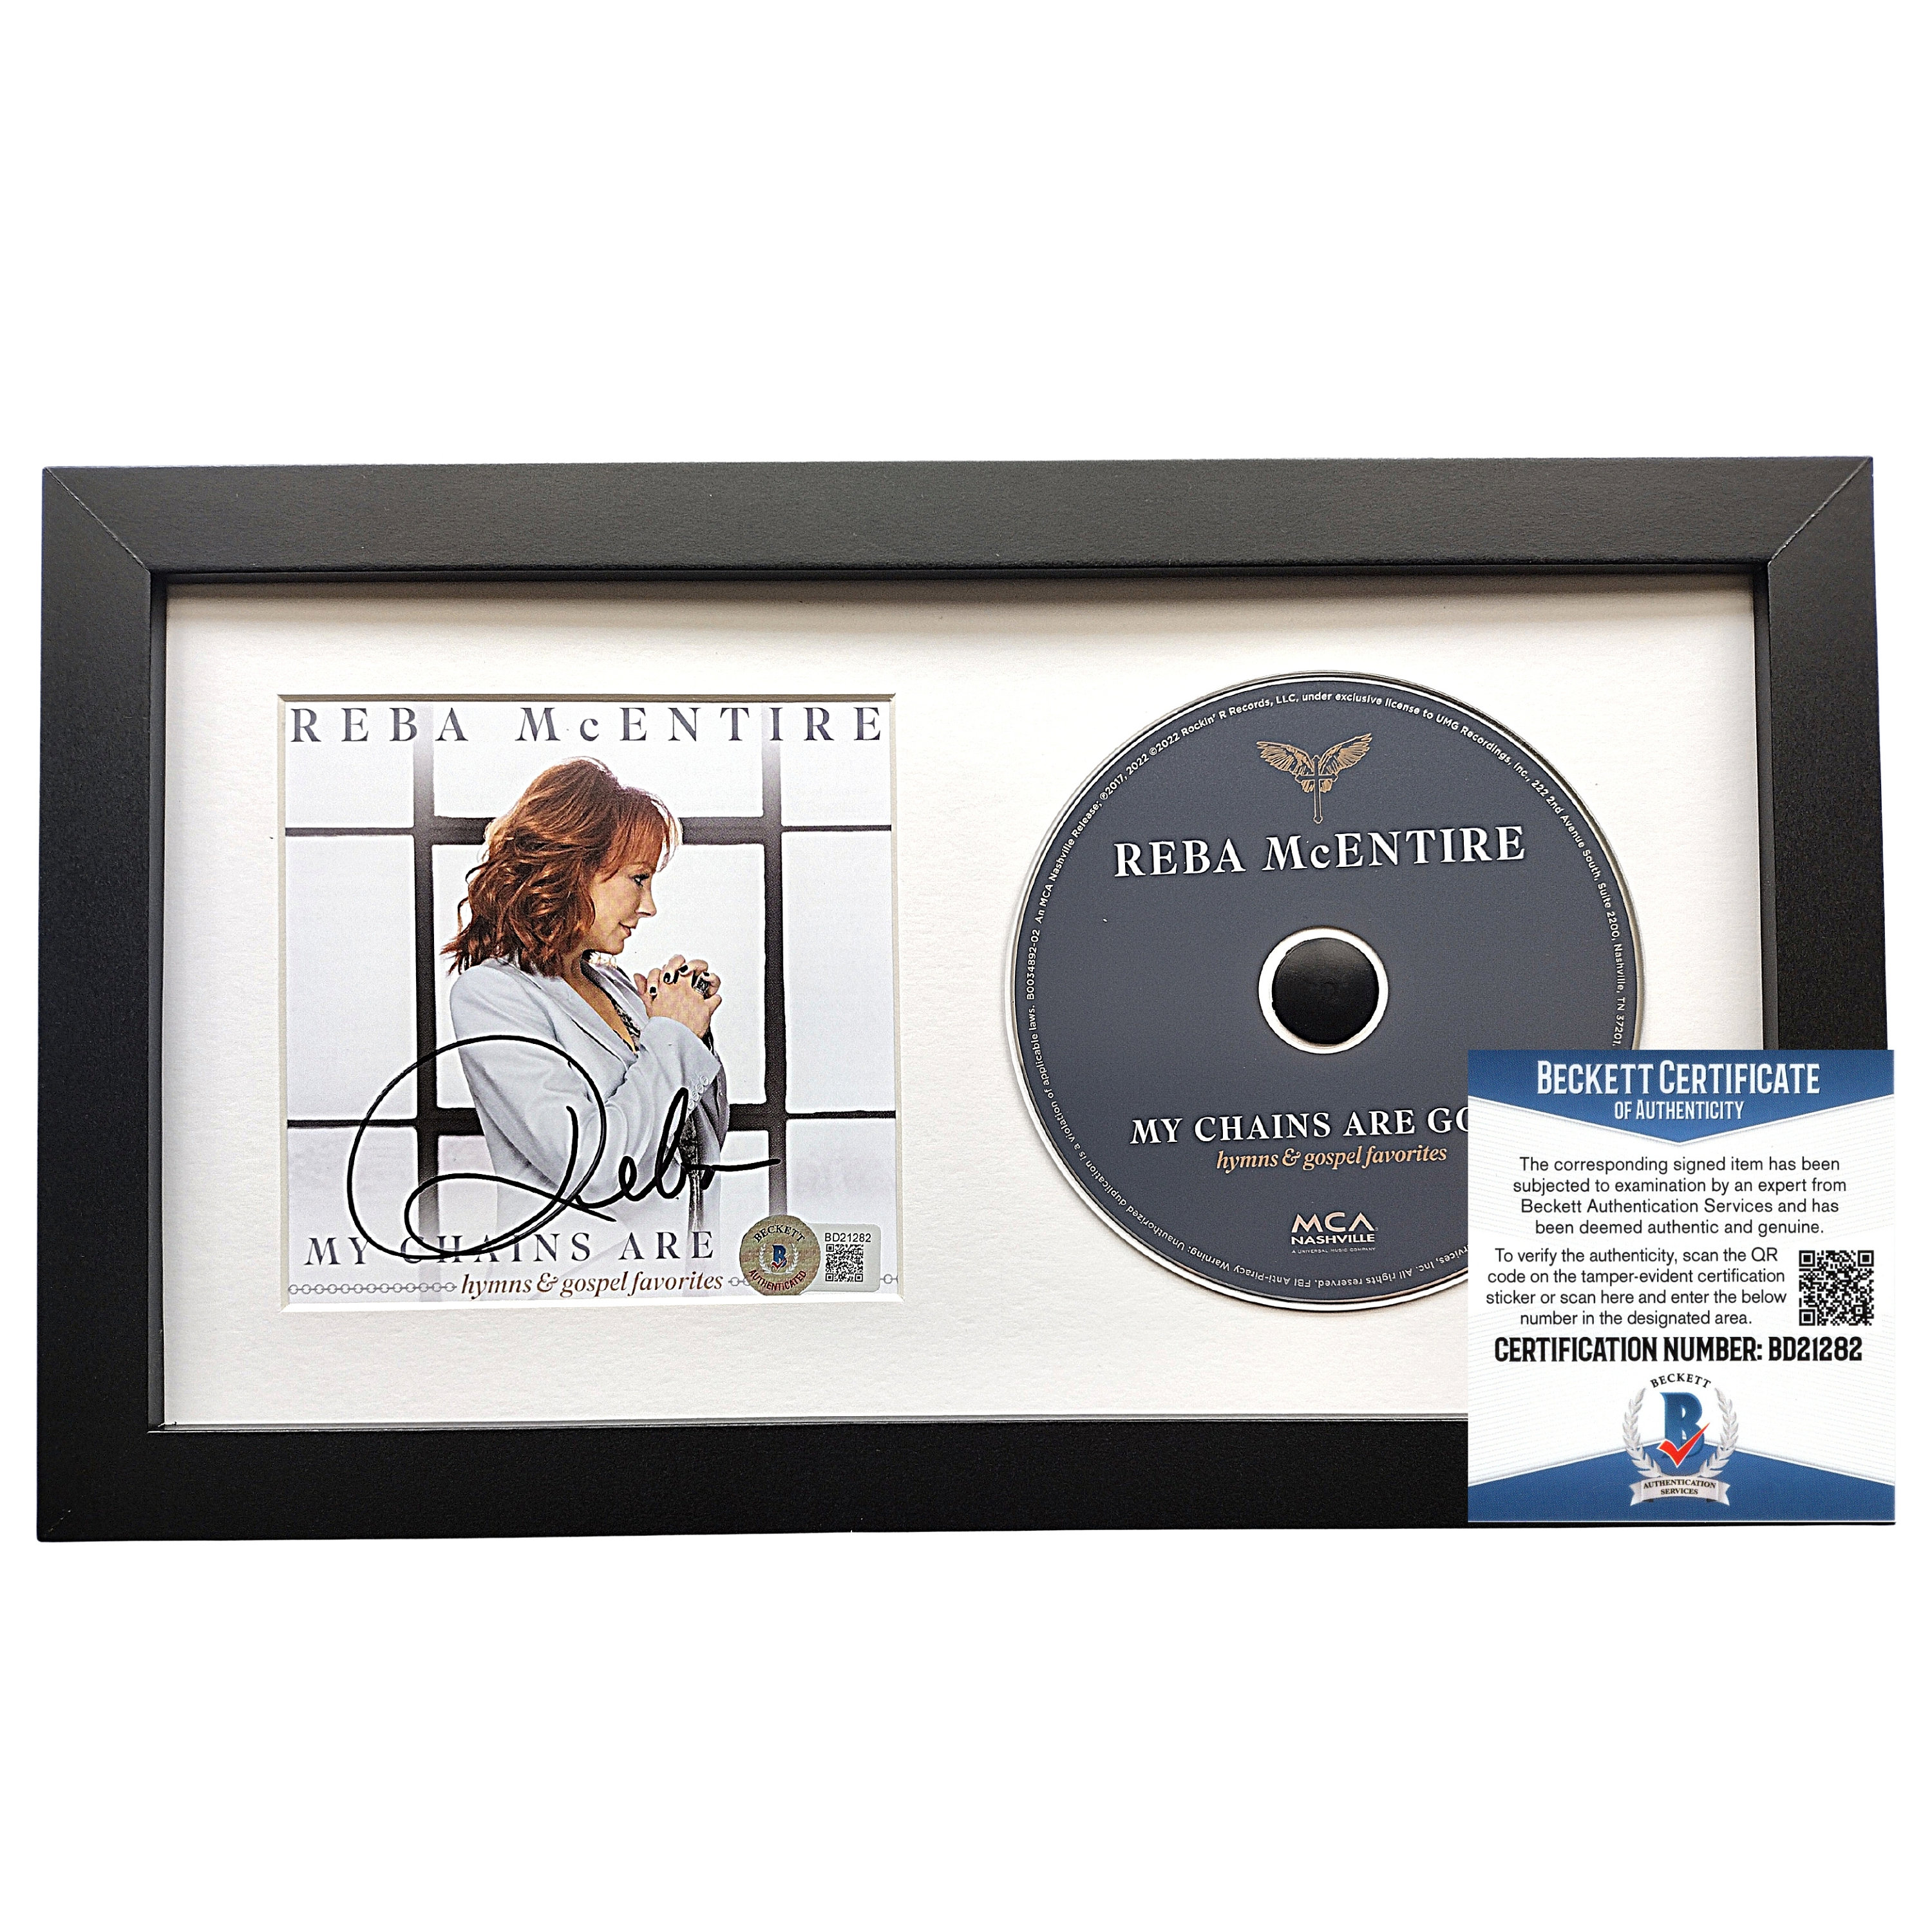 Meghan Trainor Signed Autographed CD Booklet Made You Look JSA COA